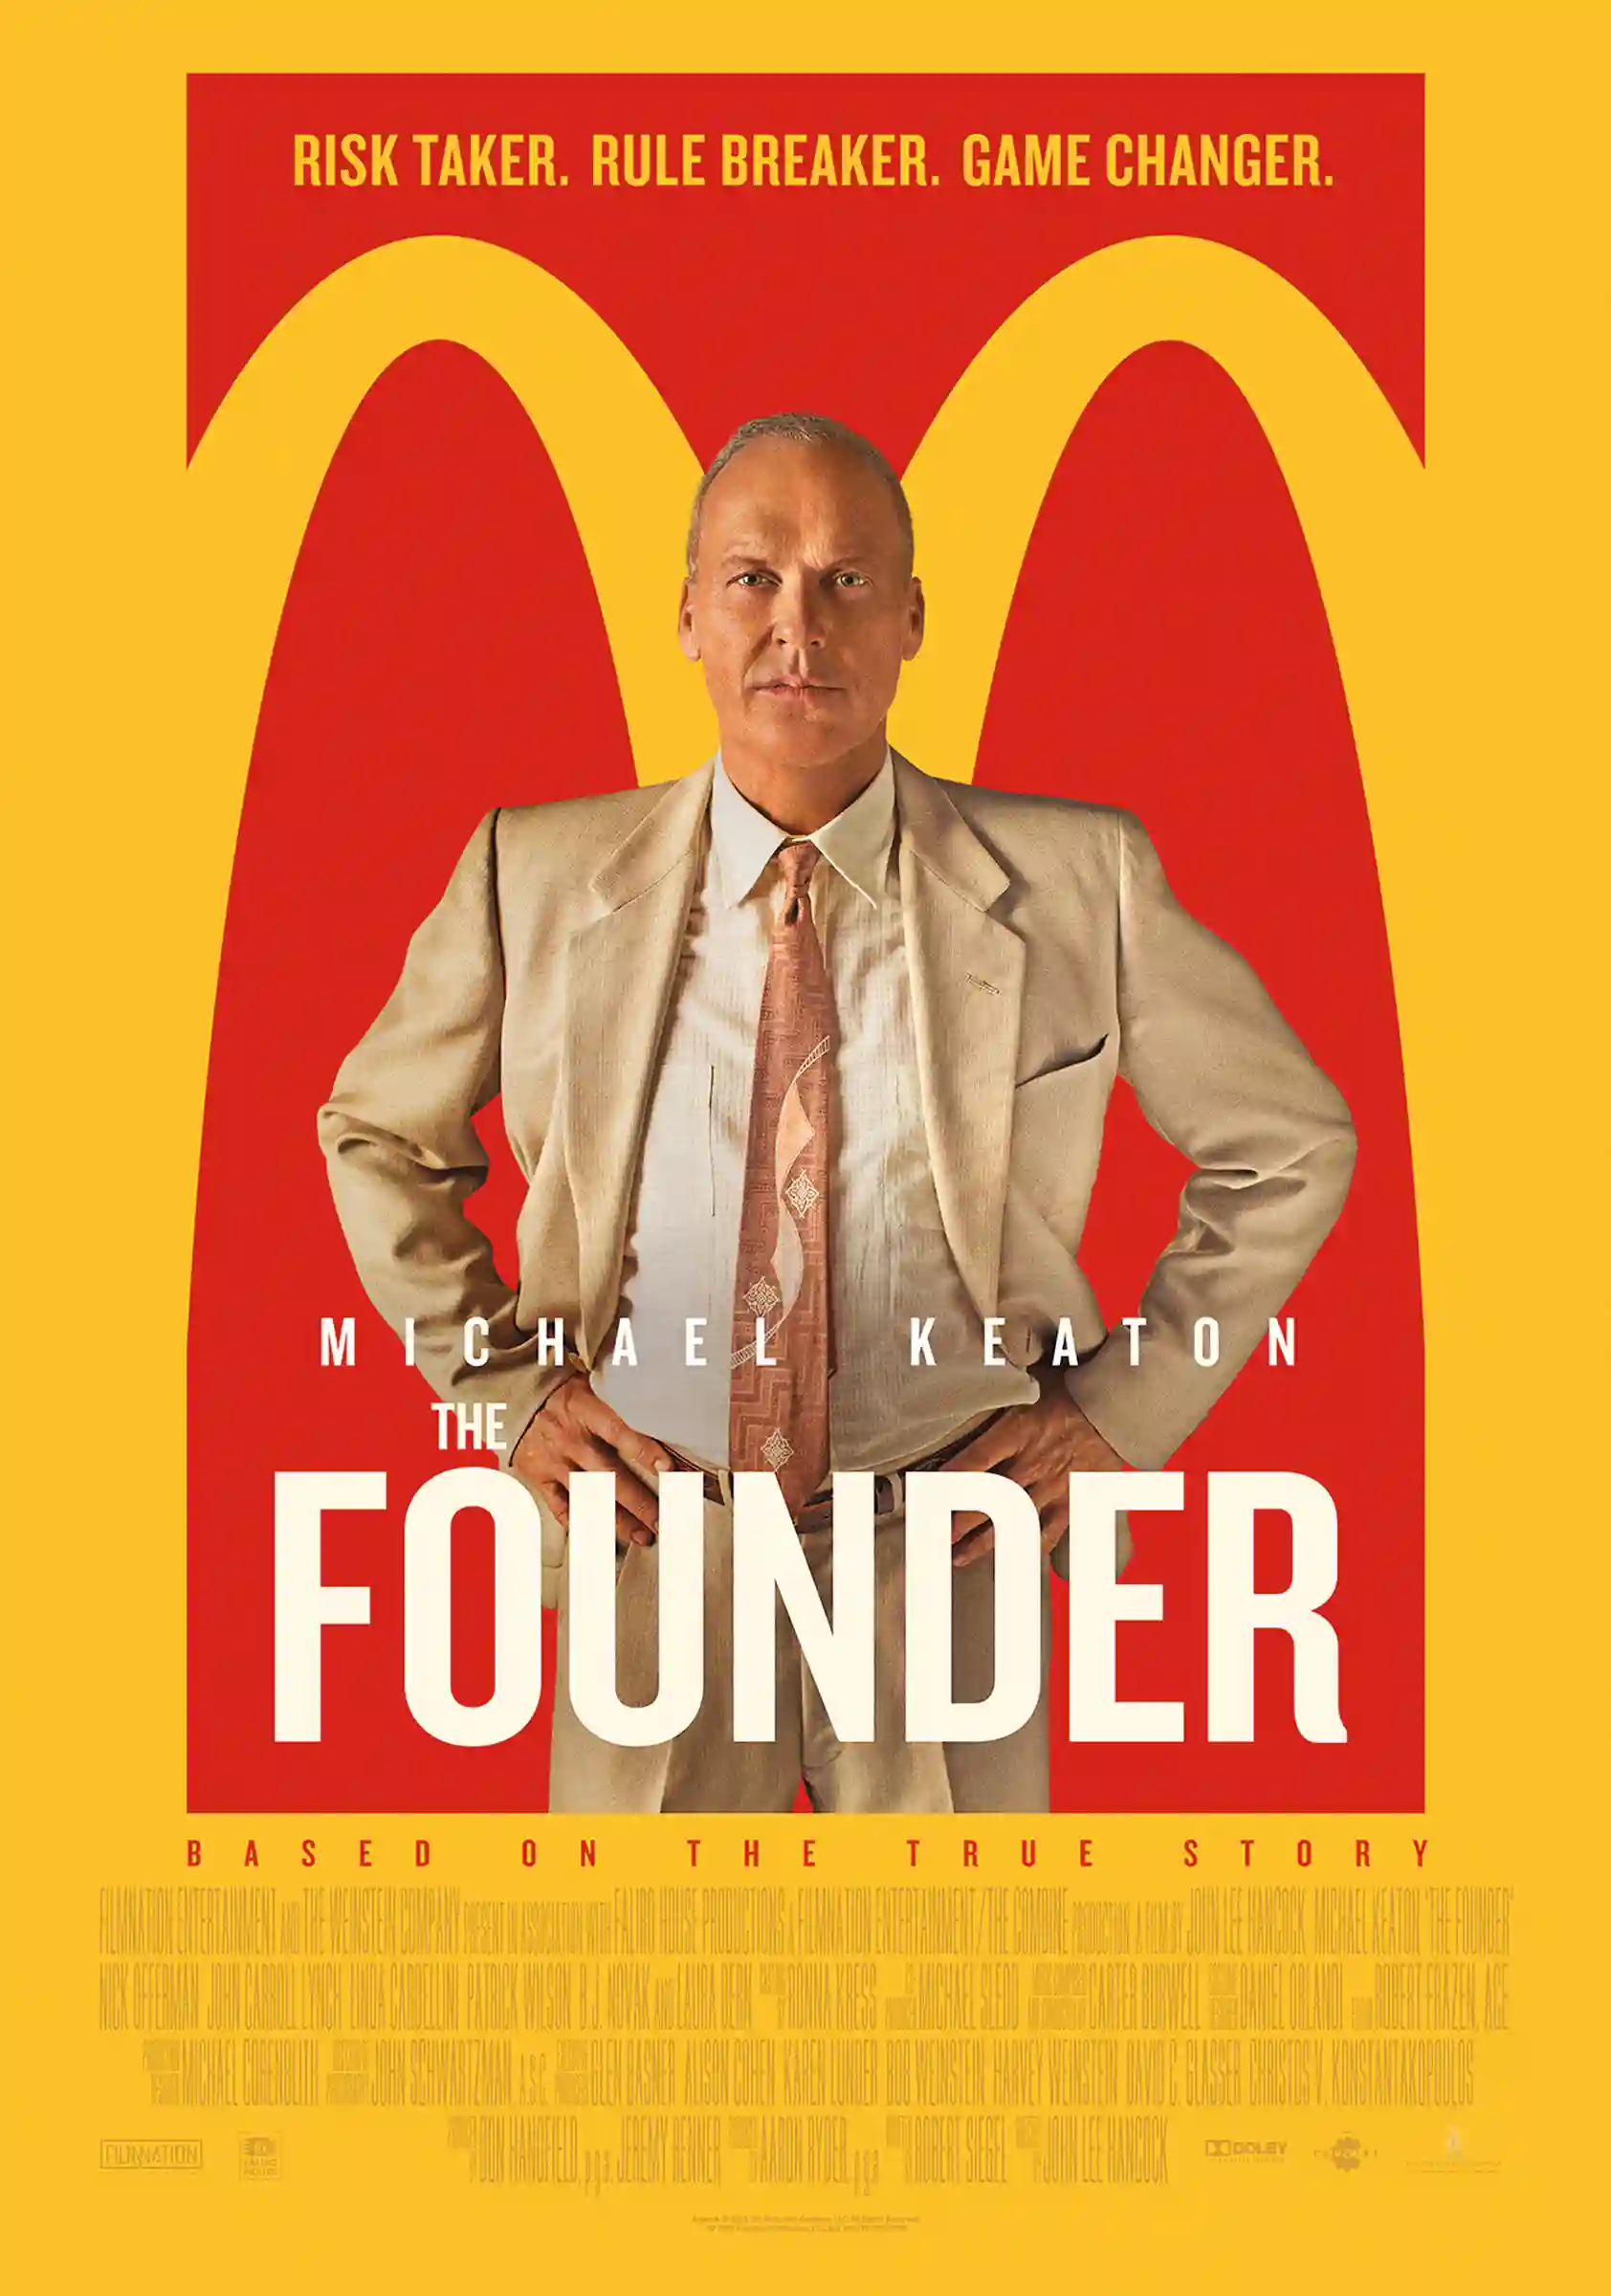 Founder movie poster for HR leaders